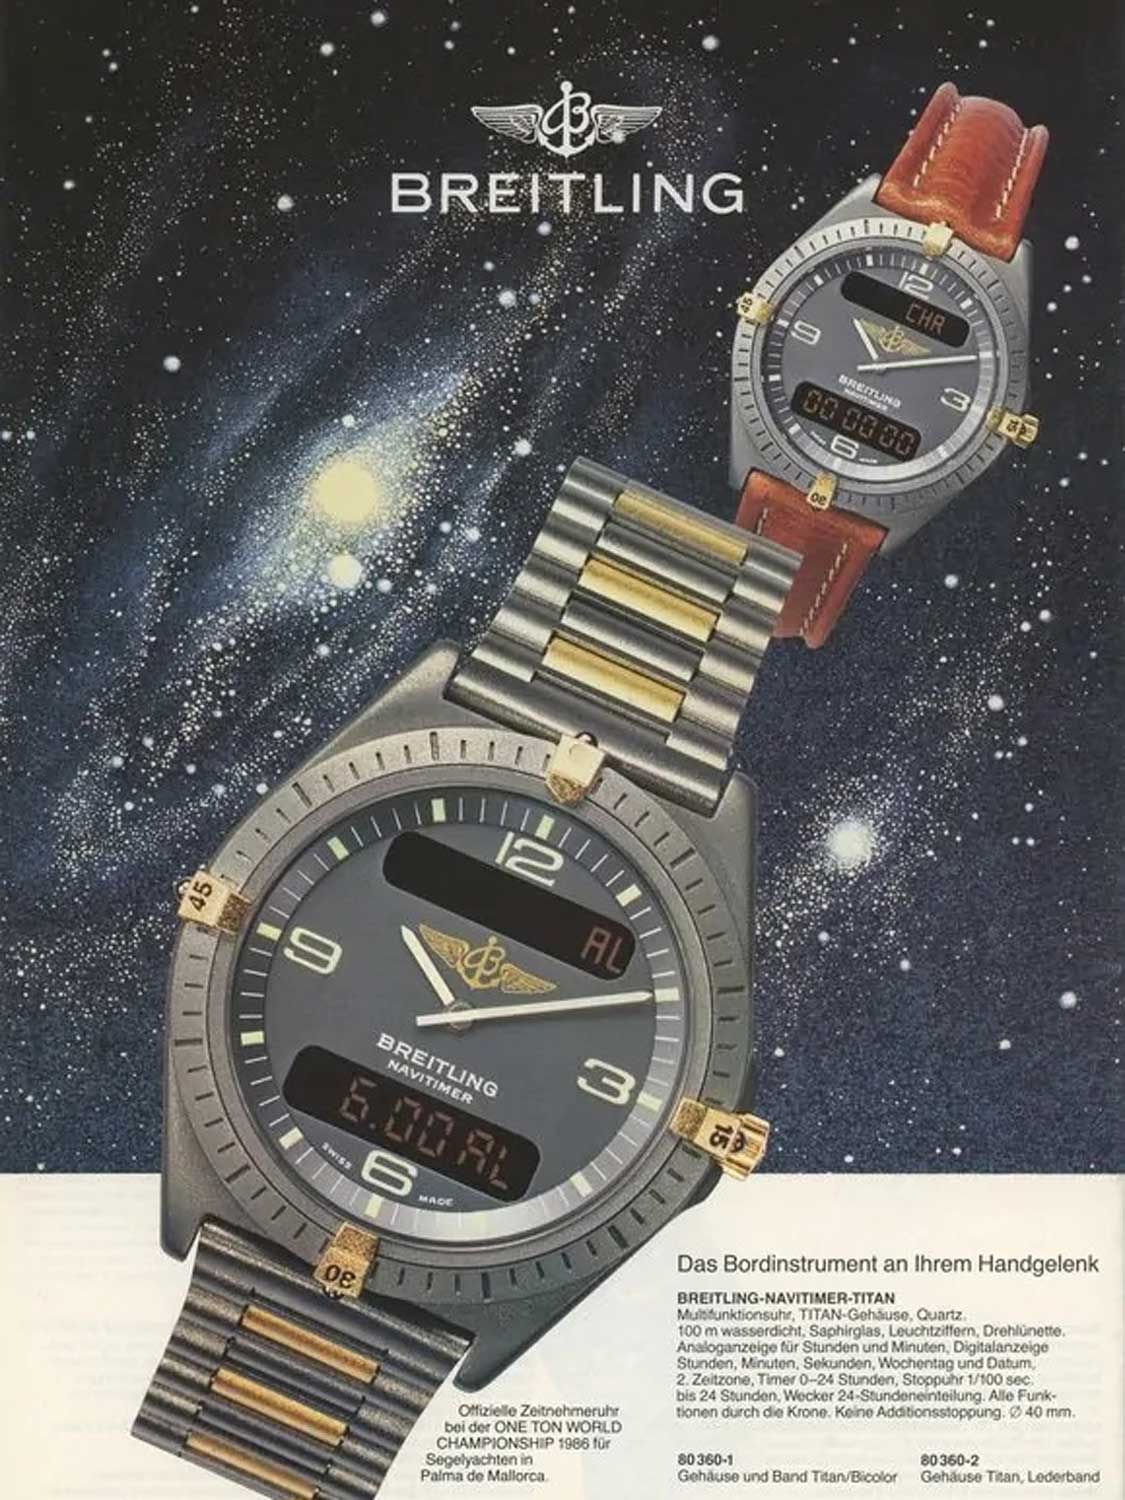 Old advertisement for Breitling Aerospace during 1985